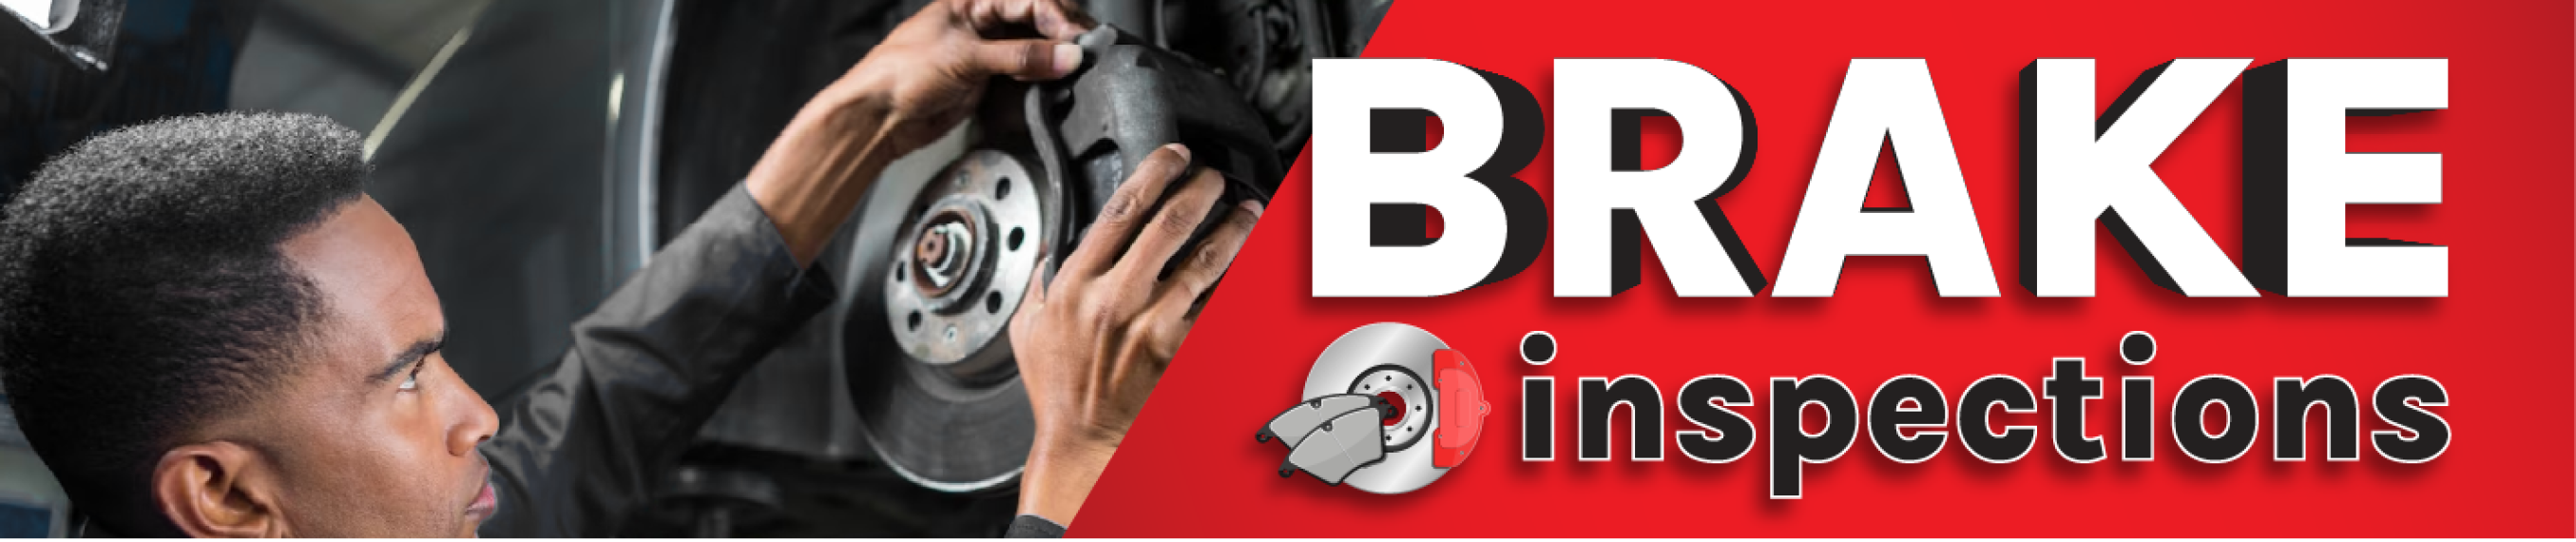 The Role of Regular Brake Inspections